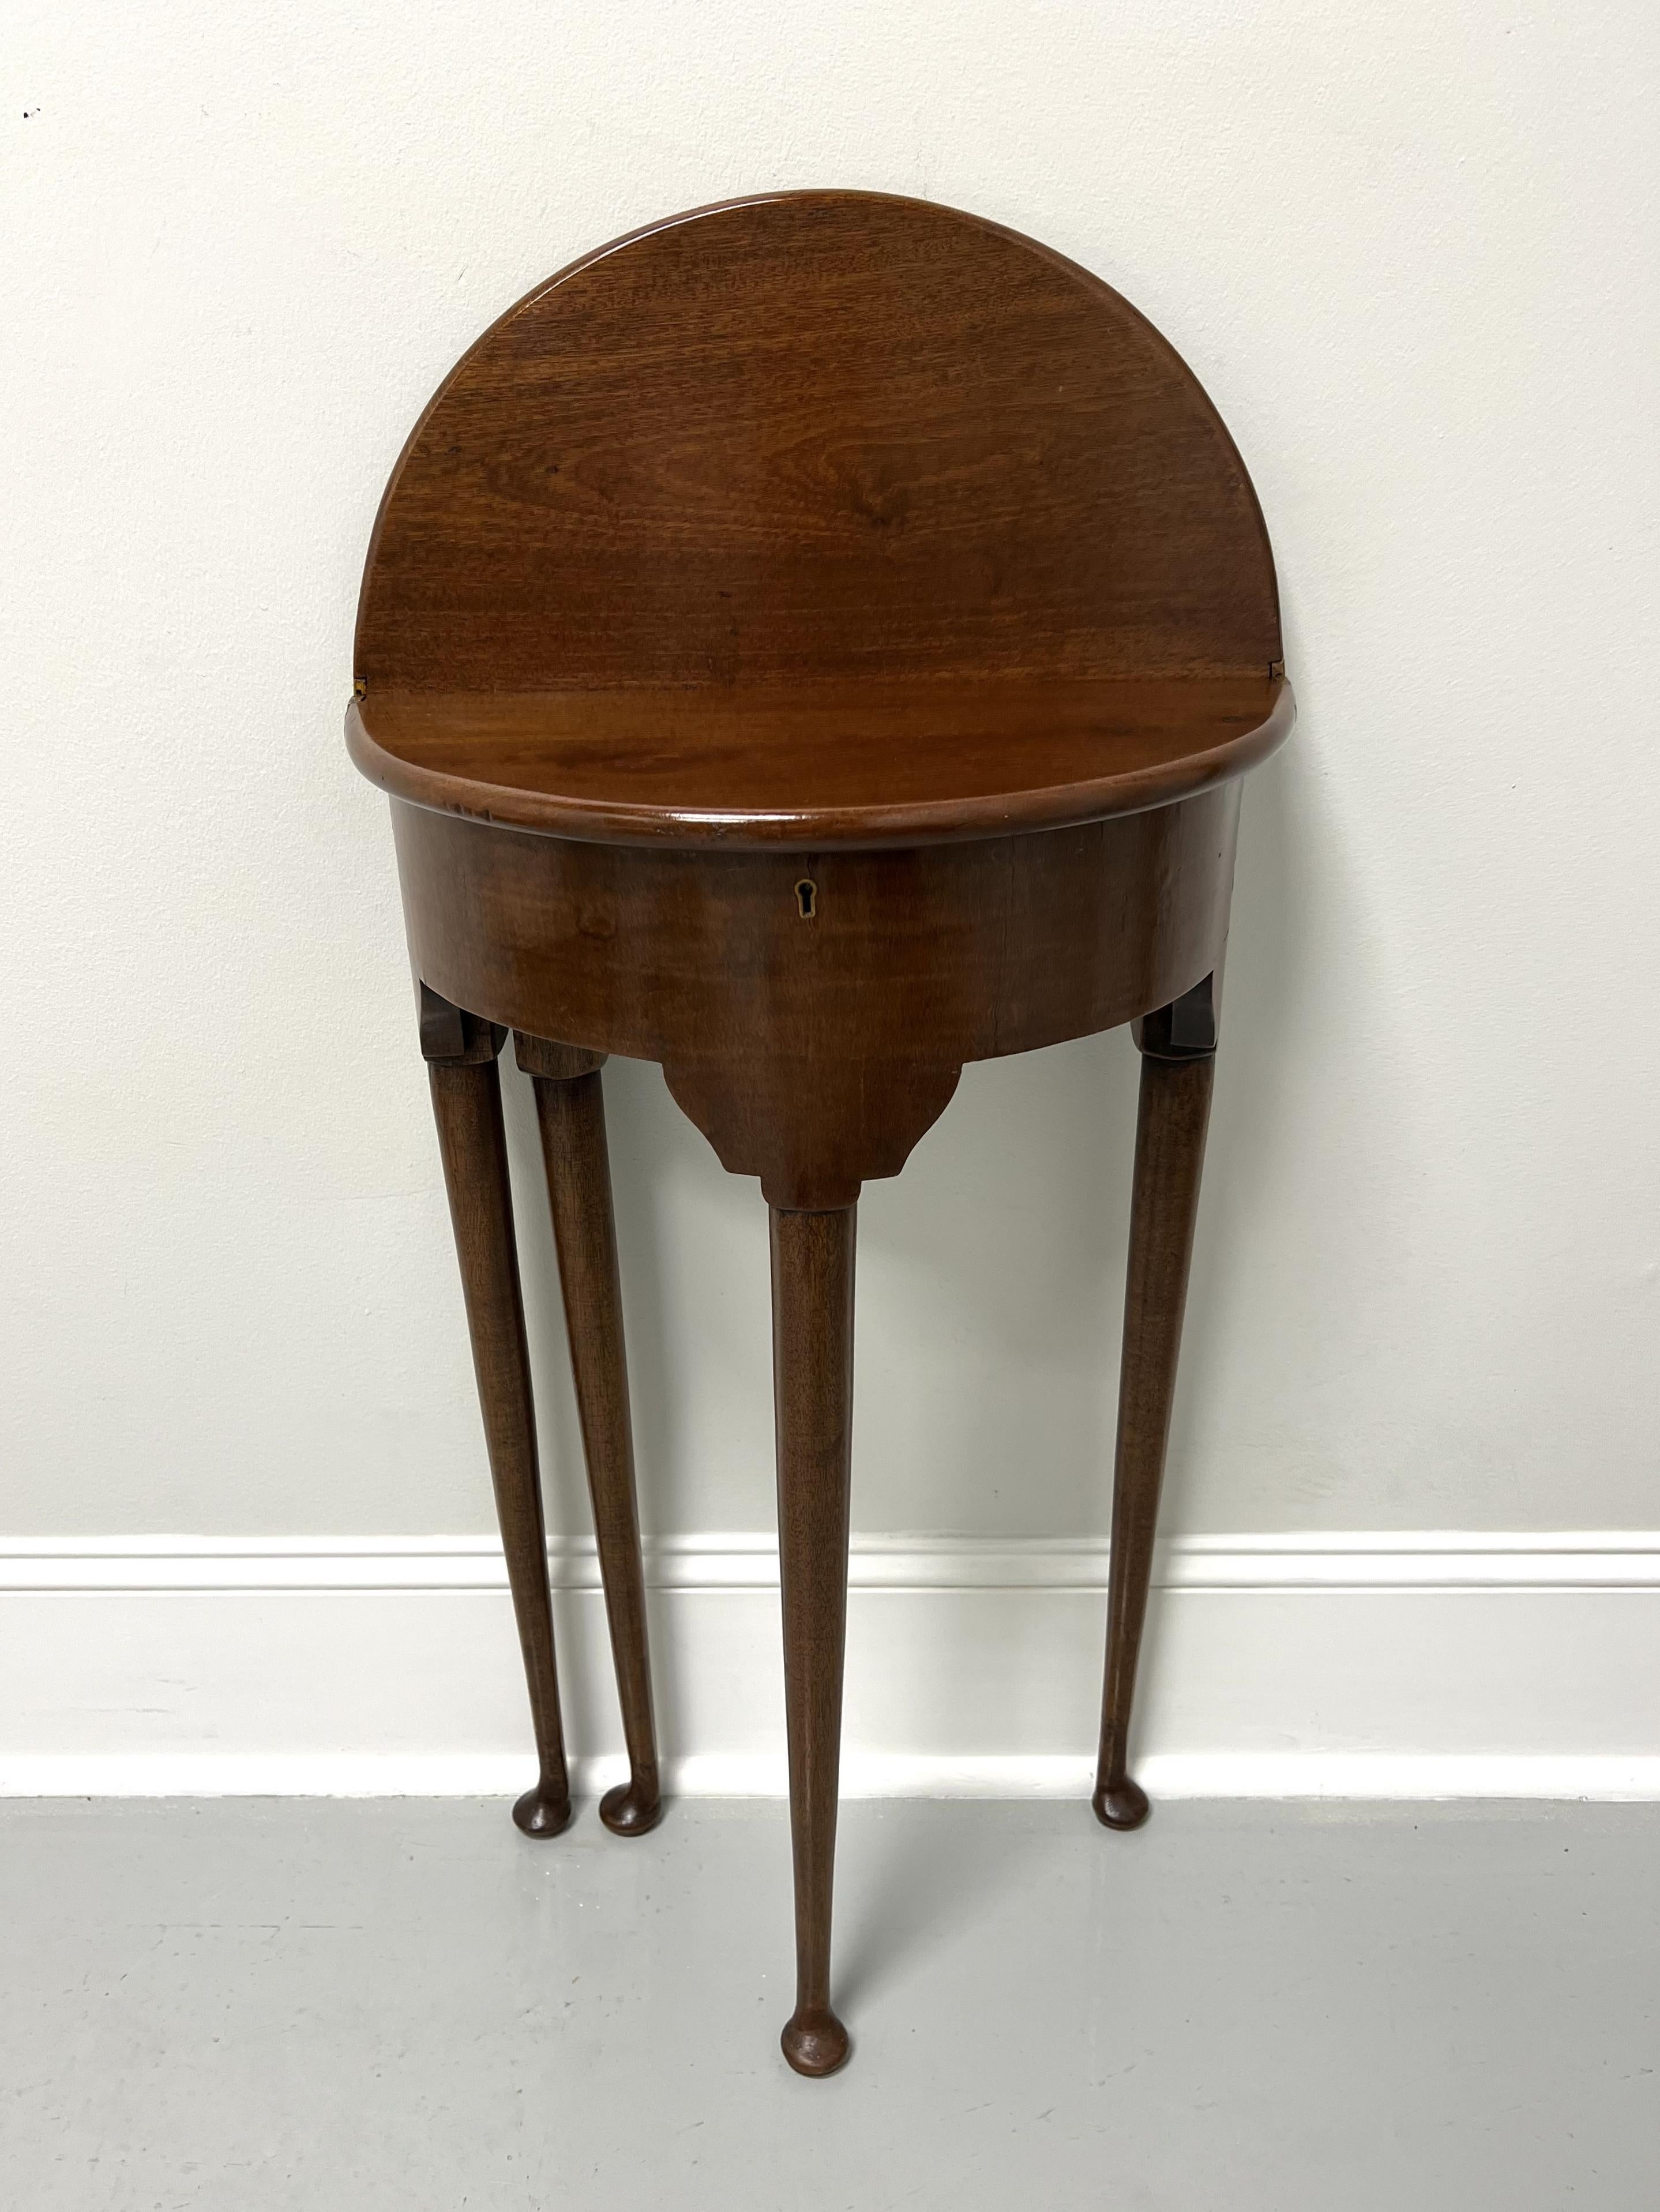 An antique 19th Century Georgian style petite flip top demilune table. Solid walnut, brass hinge hardware, half moon shape, flip top with smooth rounded edge, smooth apron carved at top of legs, tapered round straight legs, and pad feet. Back